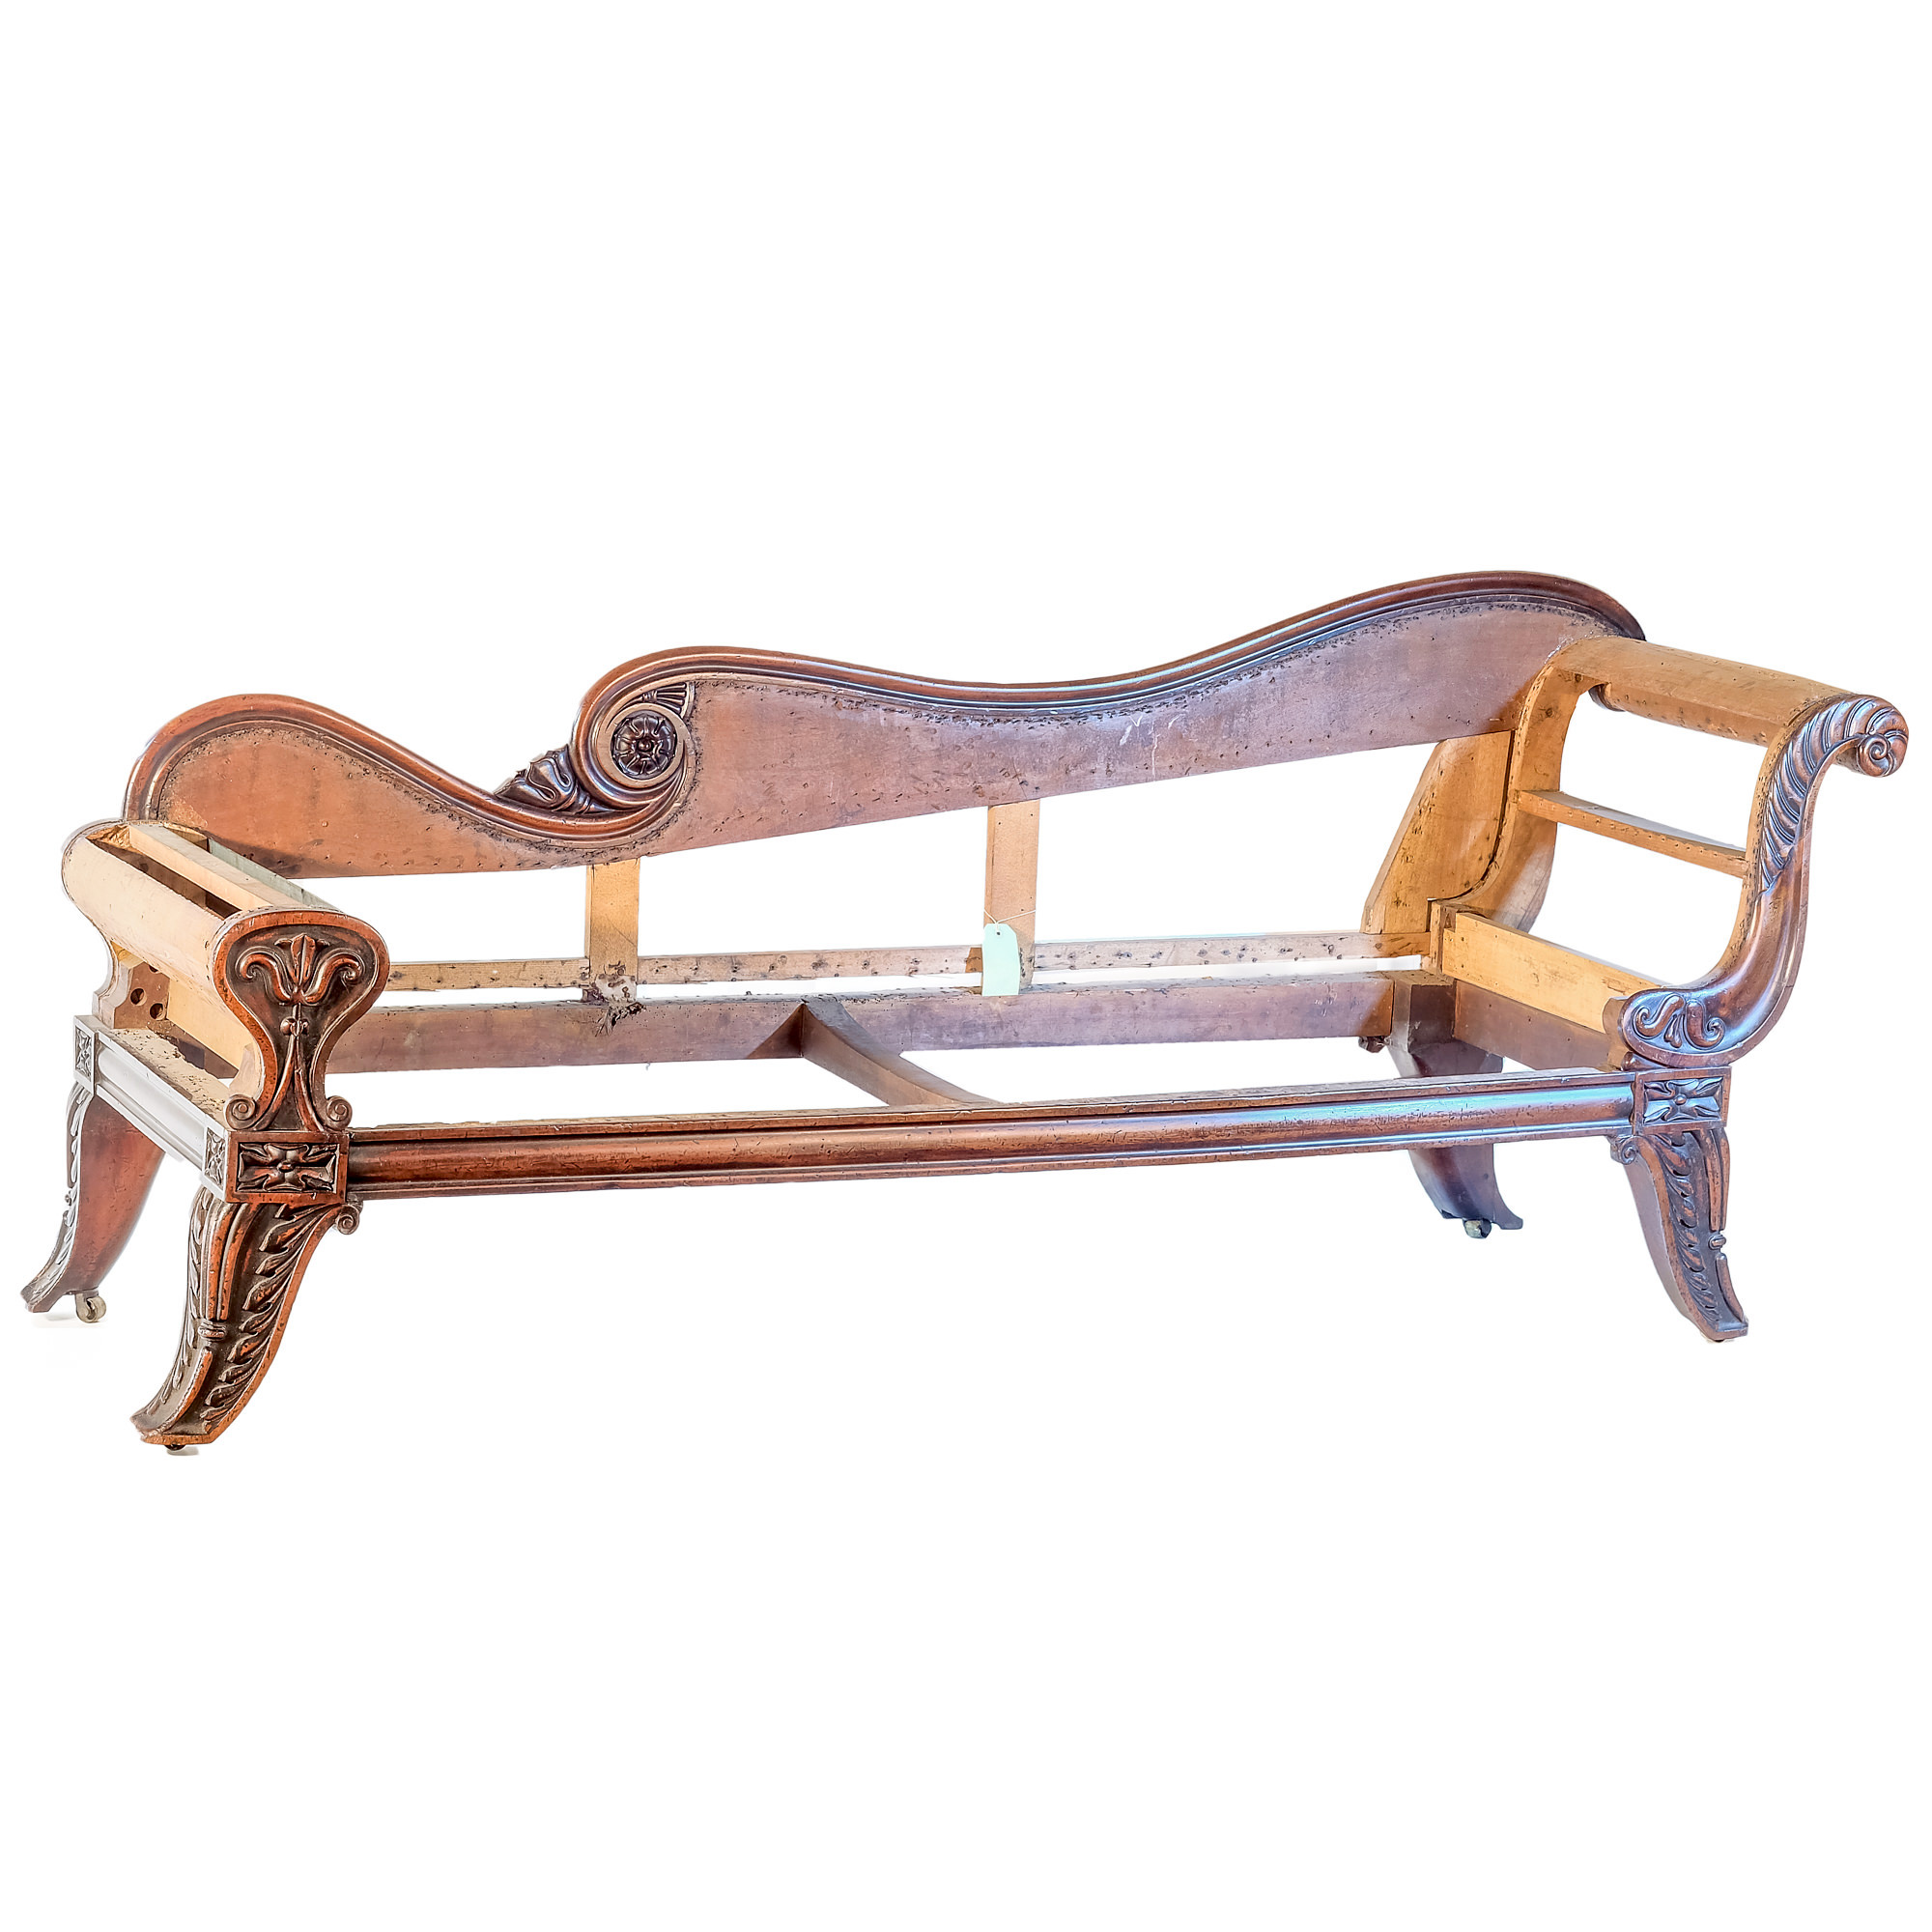 'Profusely Carved Regency Period Mahogany Chaise Lounge Circa 1820'